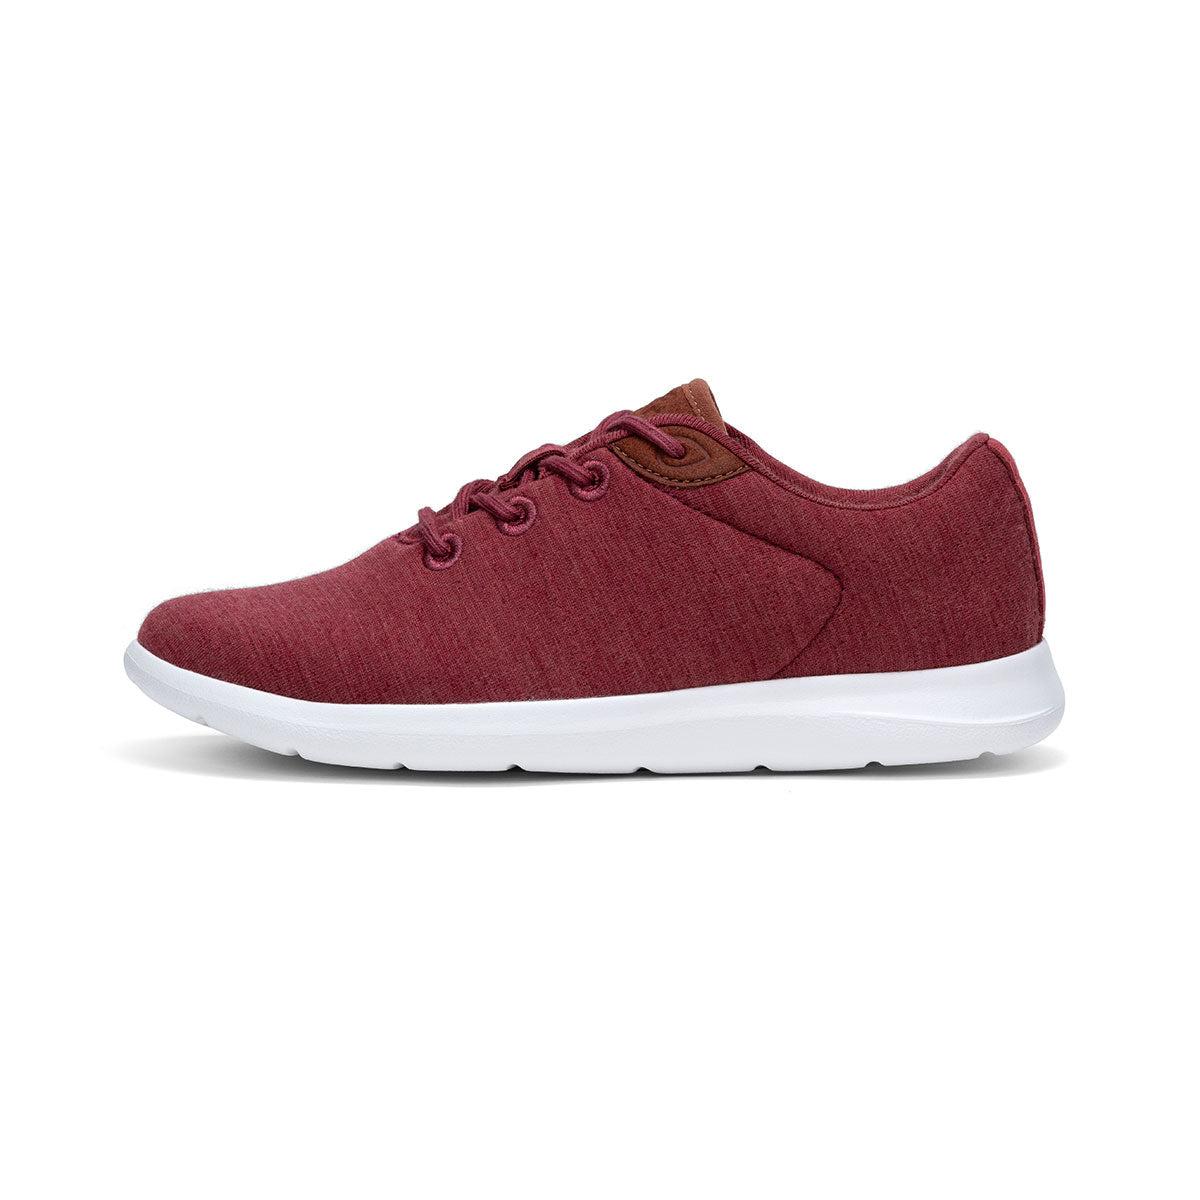 Women's Lace-Ups Tuscan Red